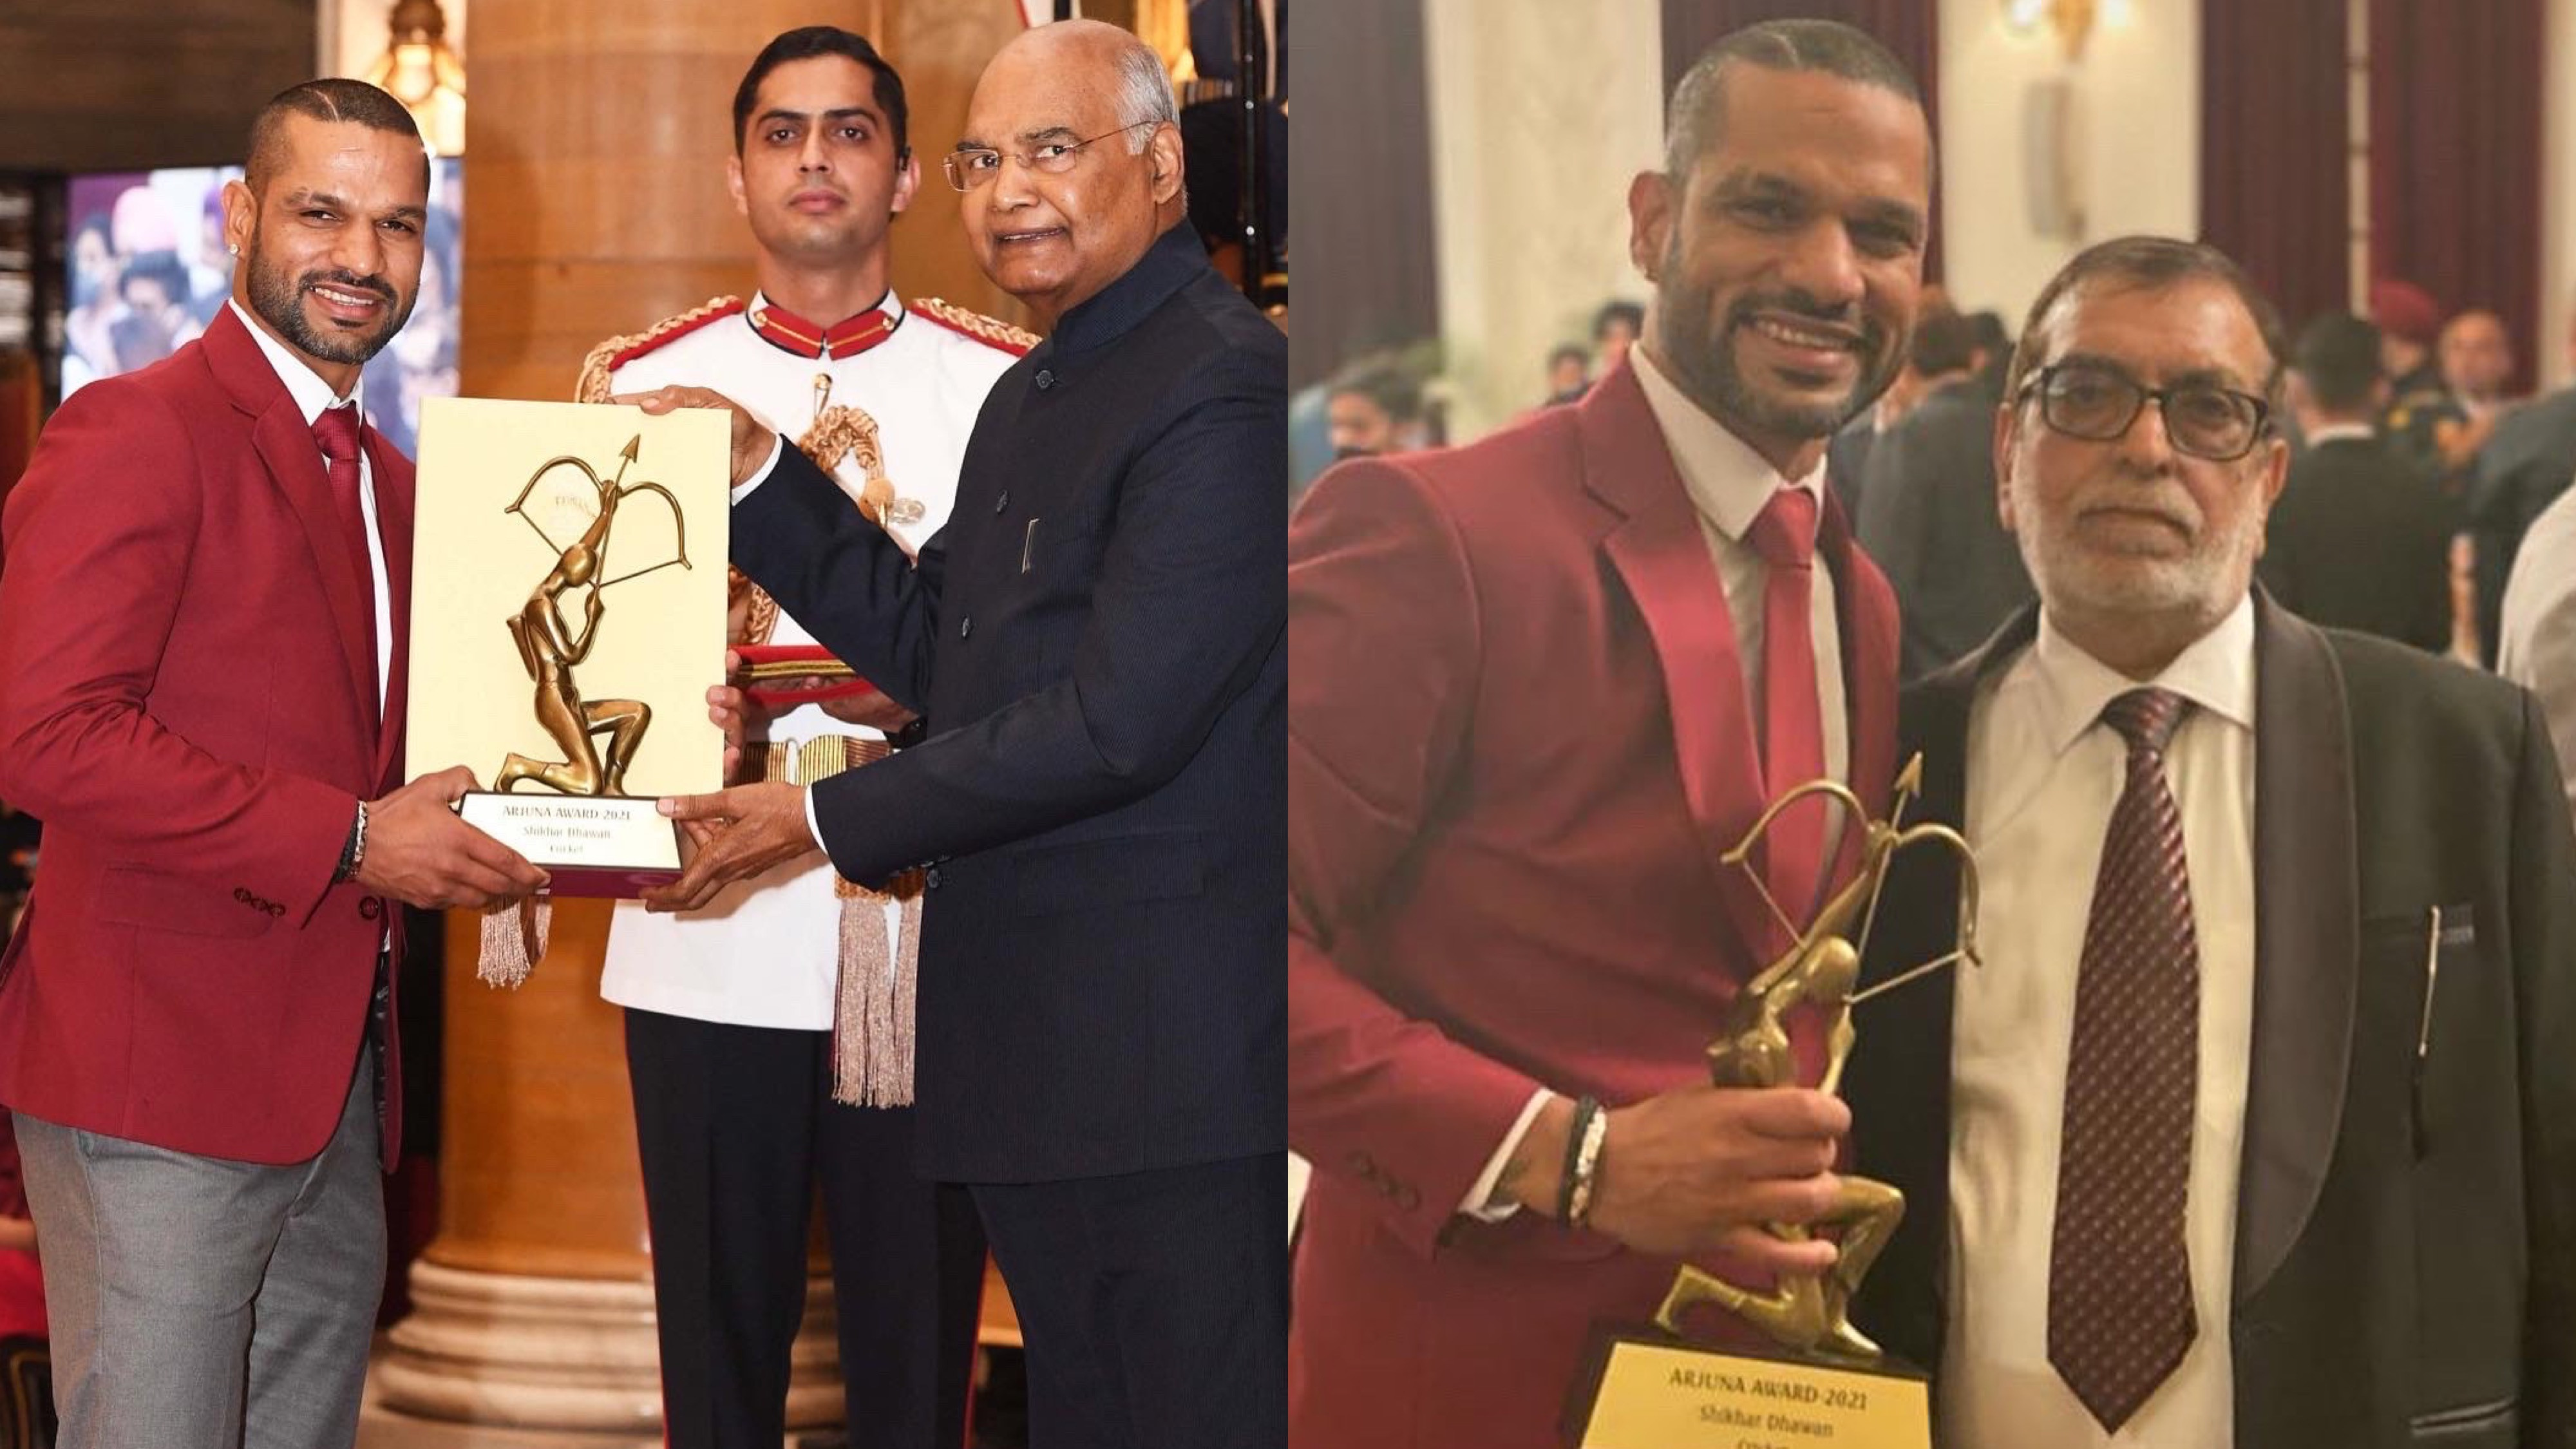 Shikhar Dhawan thanks the people who stood by him in his journey after receiving Arjuna Award